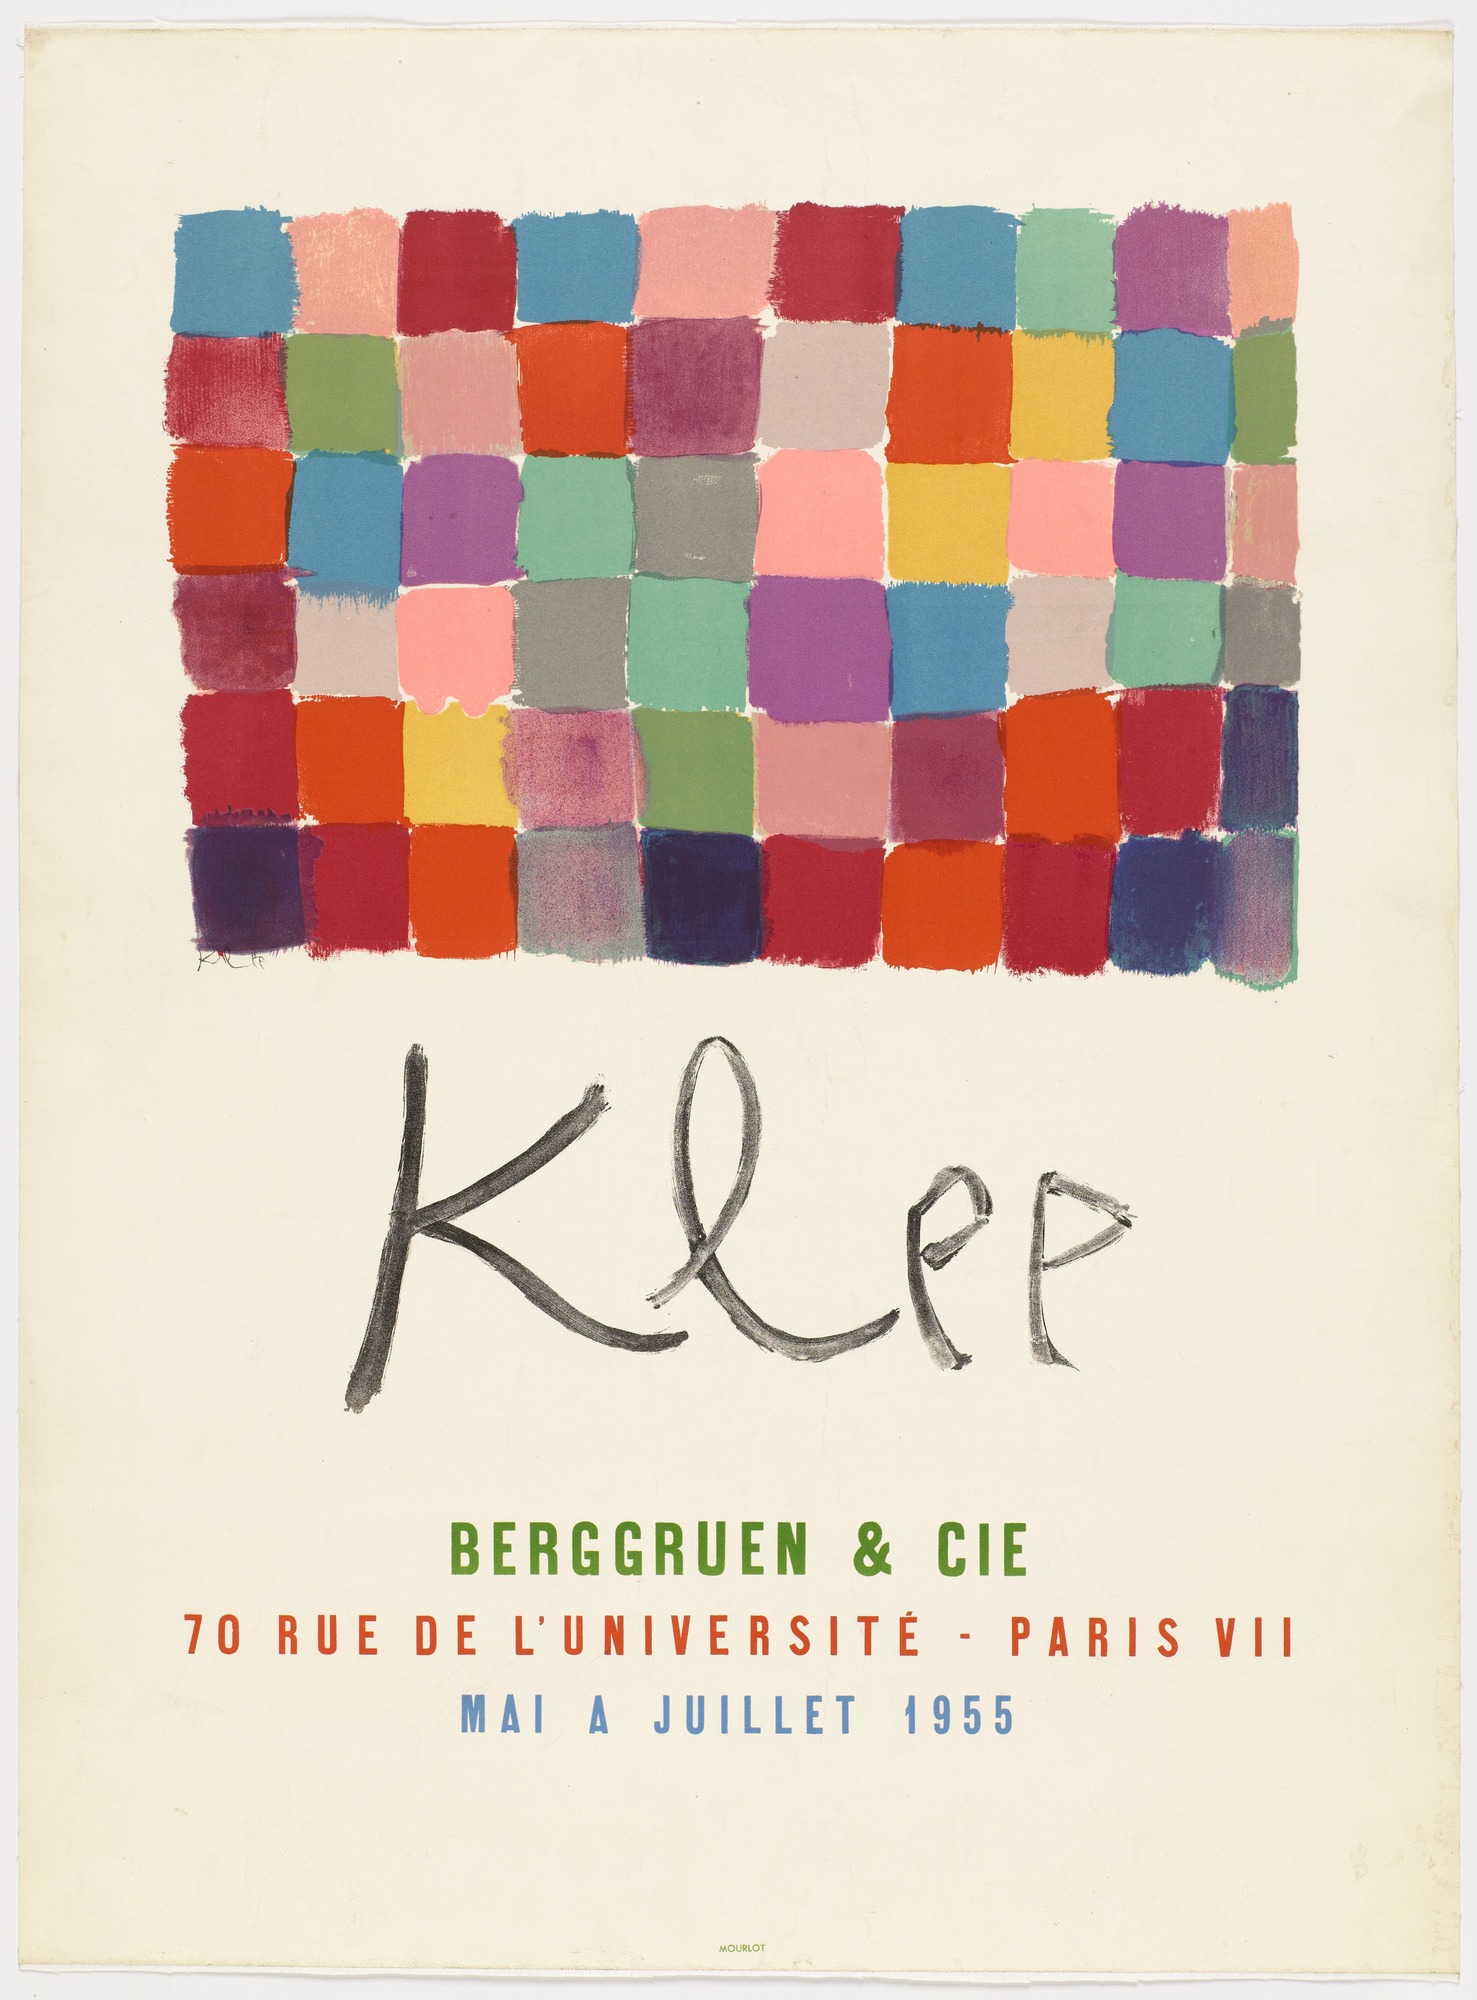 Museum Exhibition Poster Paul Klee Modern Art Exhibition Poster